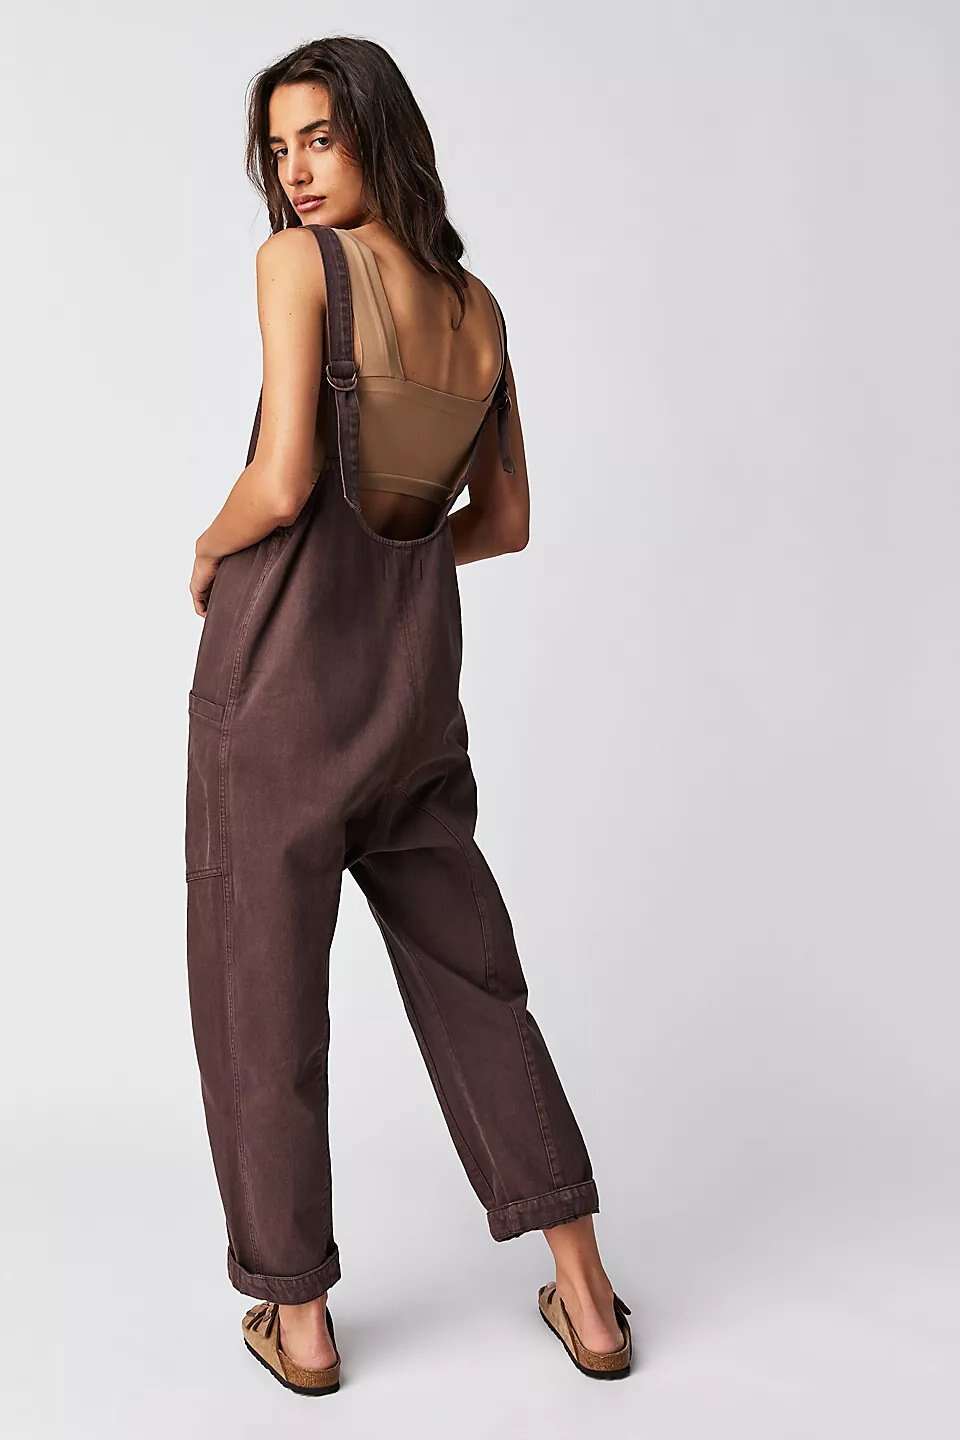 New arrival-Denim Jumpsuit With Pockets (Buy 2 Free Shipping)